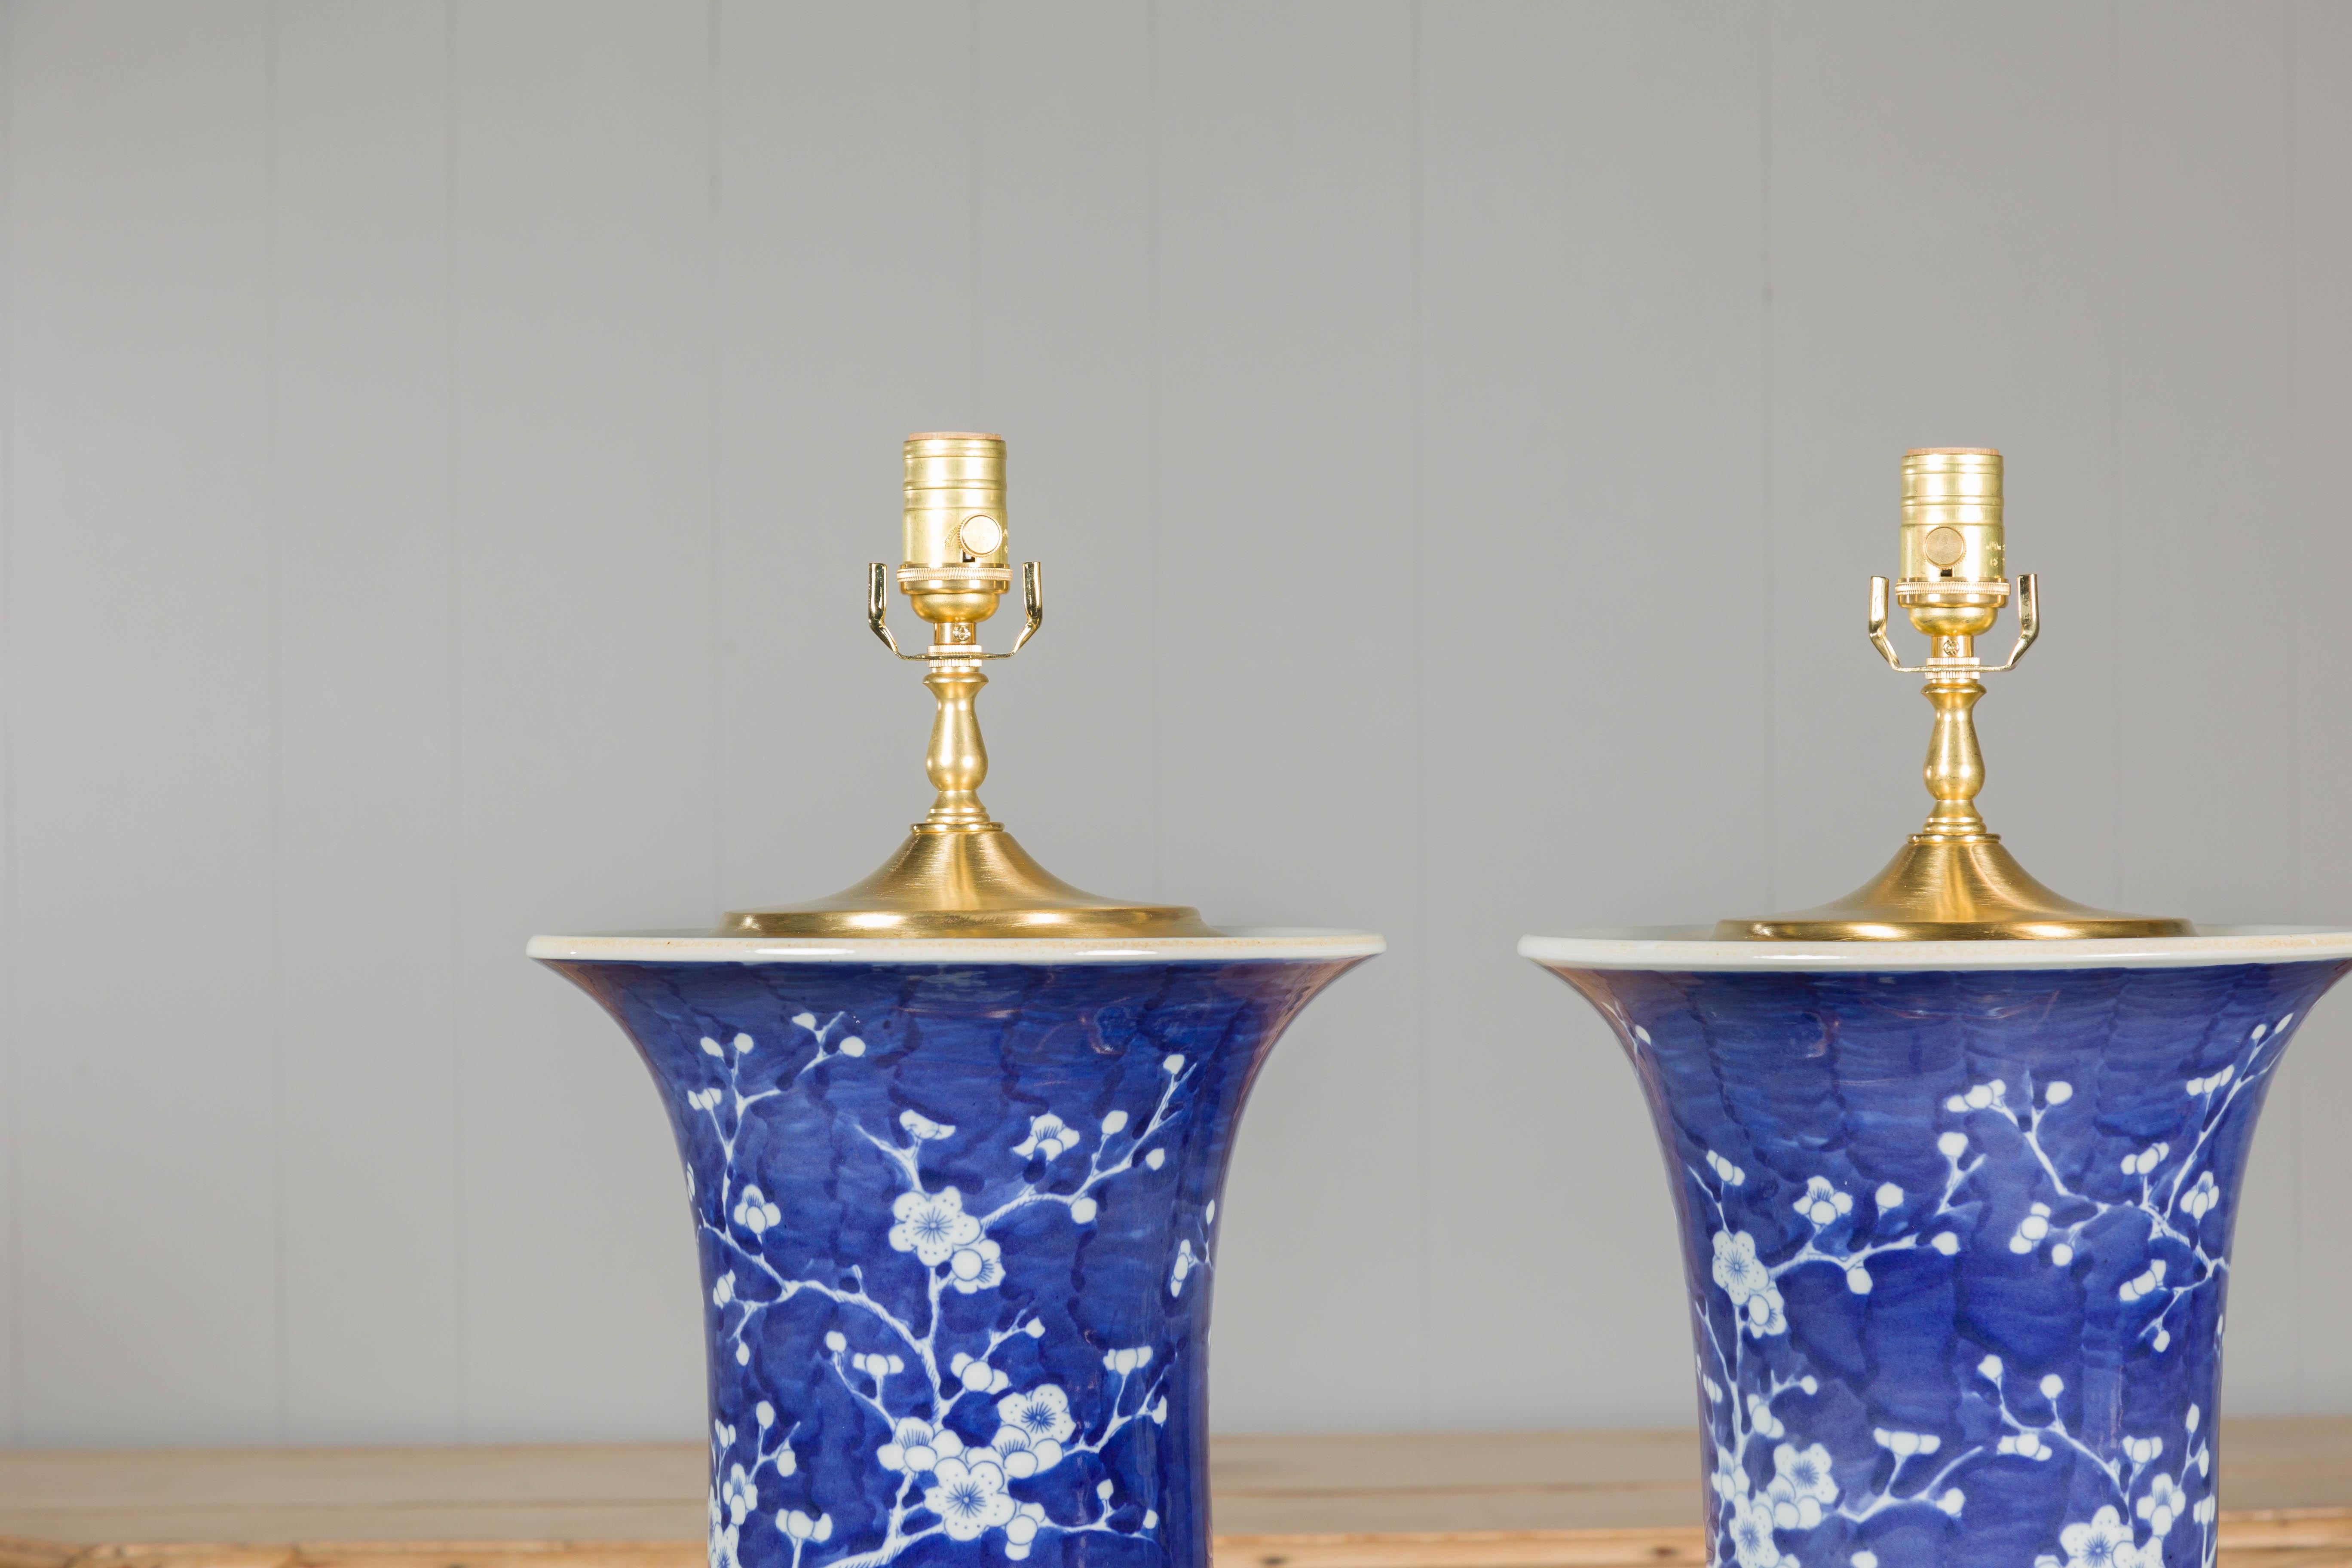 20th Century Midcentury Porcelain Blue and White Table Lamps with Blooming Trees, a Pair For Sale